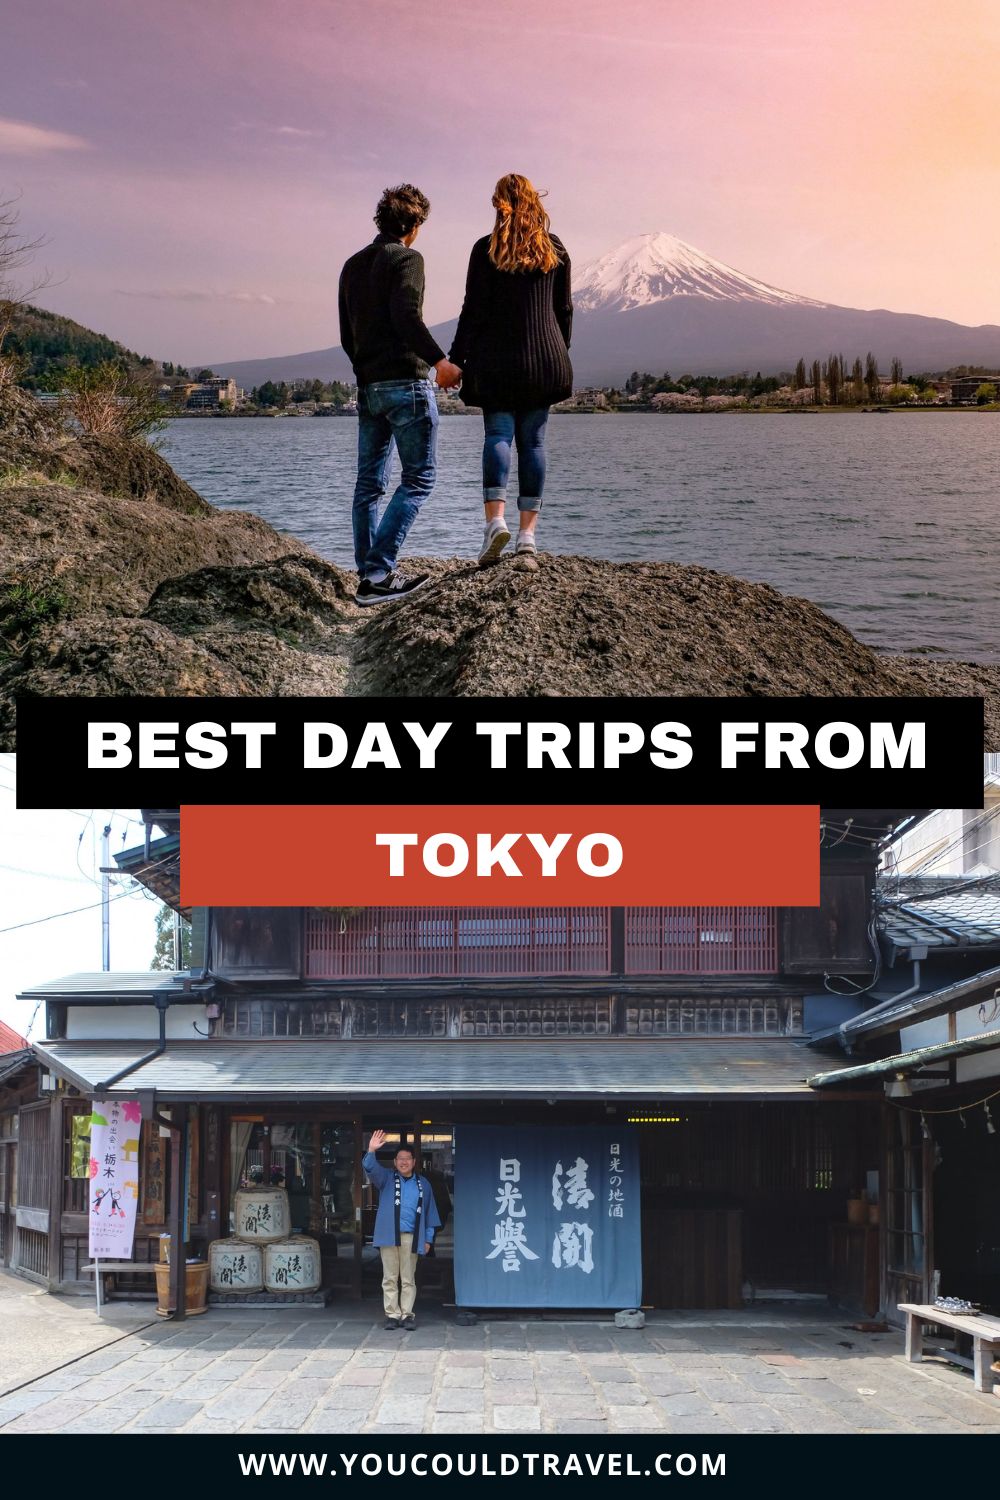 Most amazing day trips from Tokyo